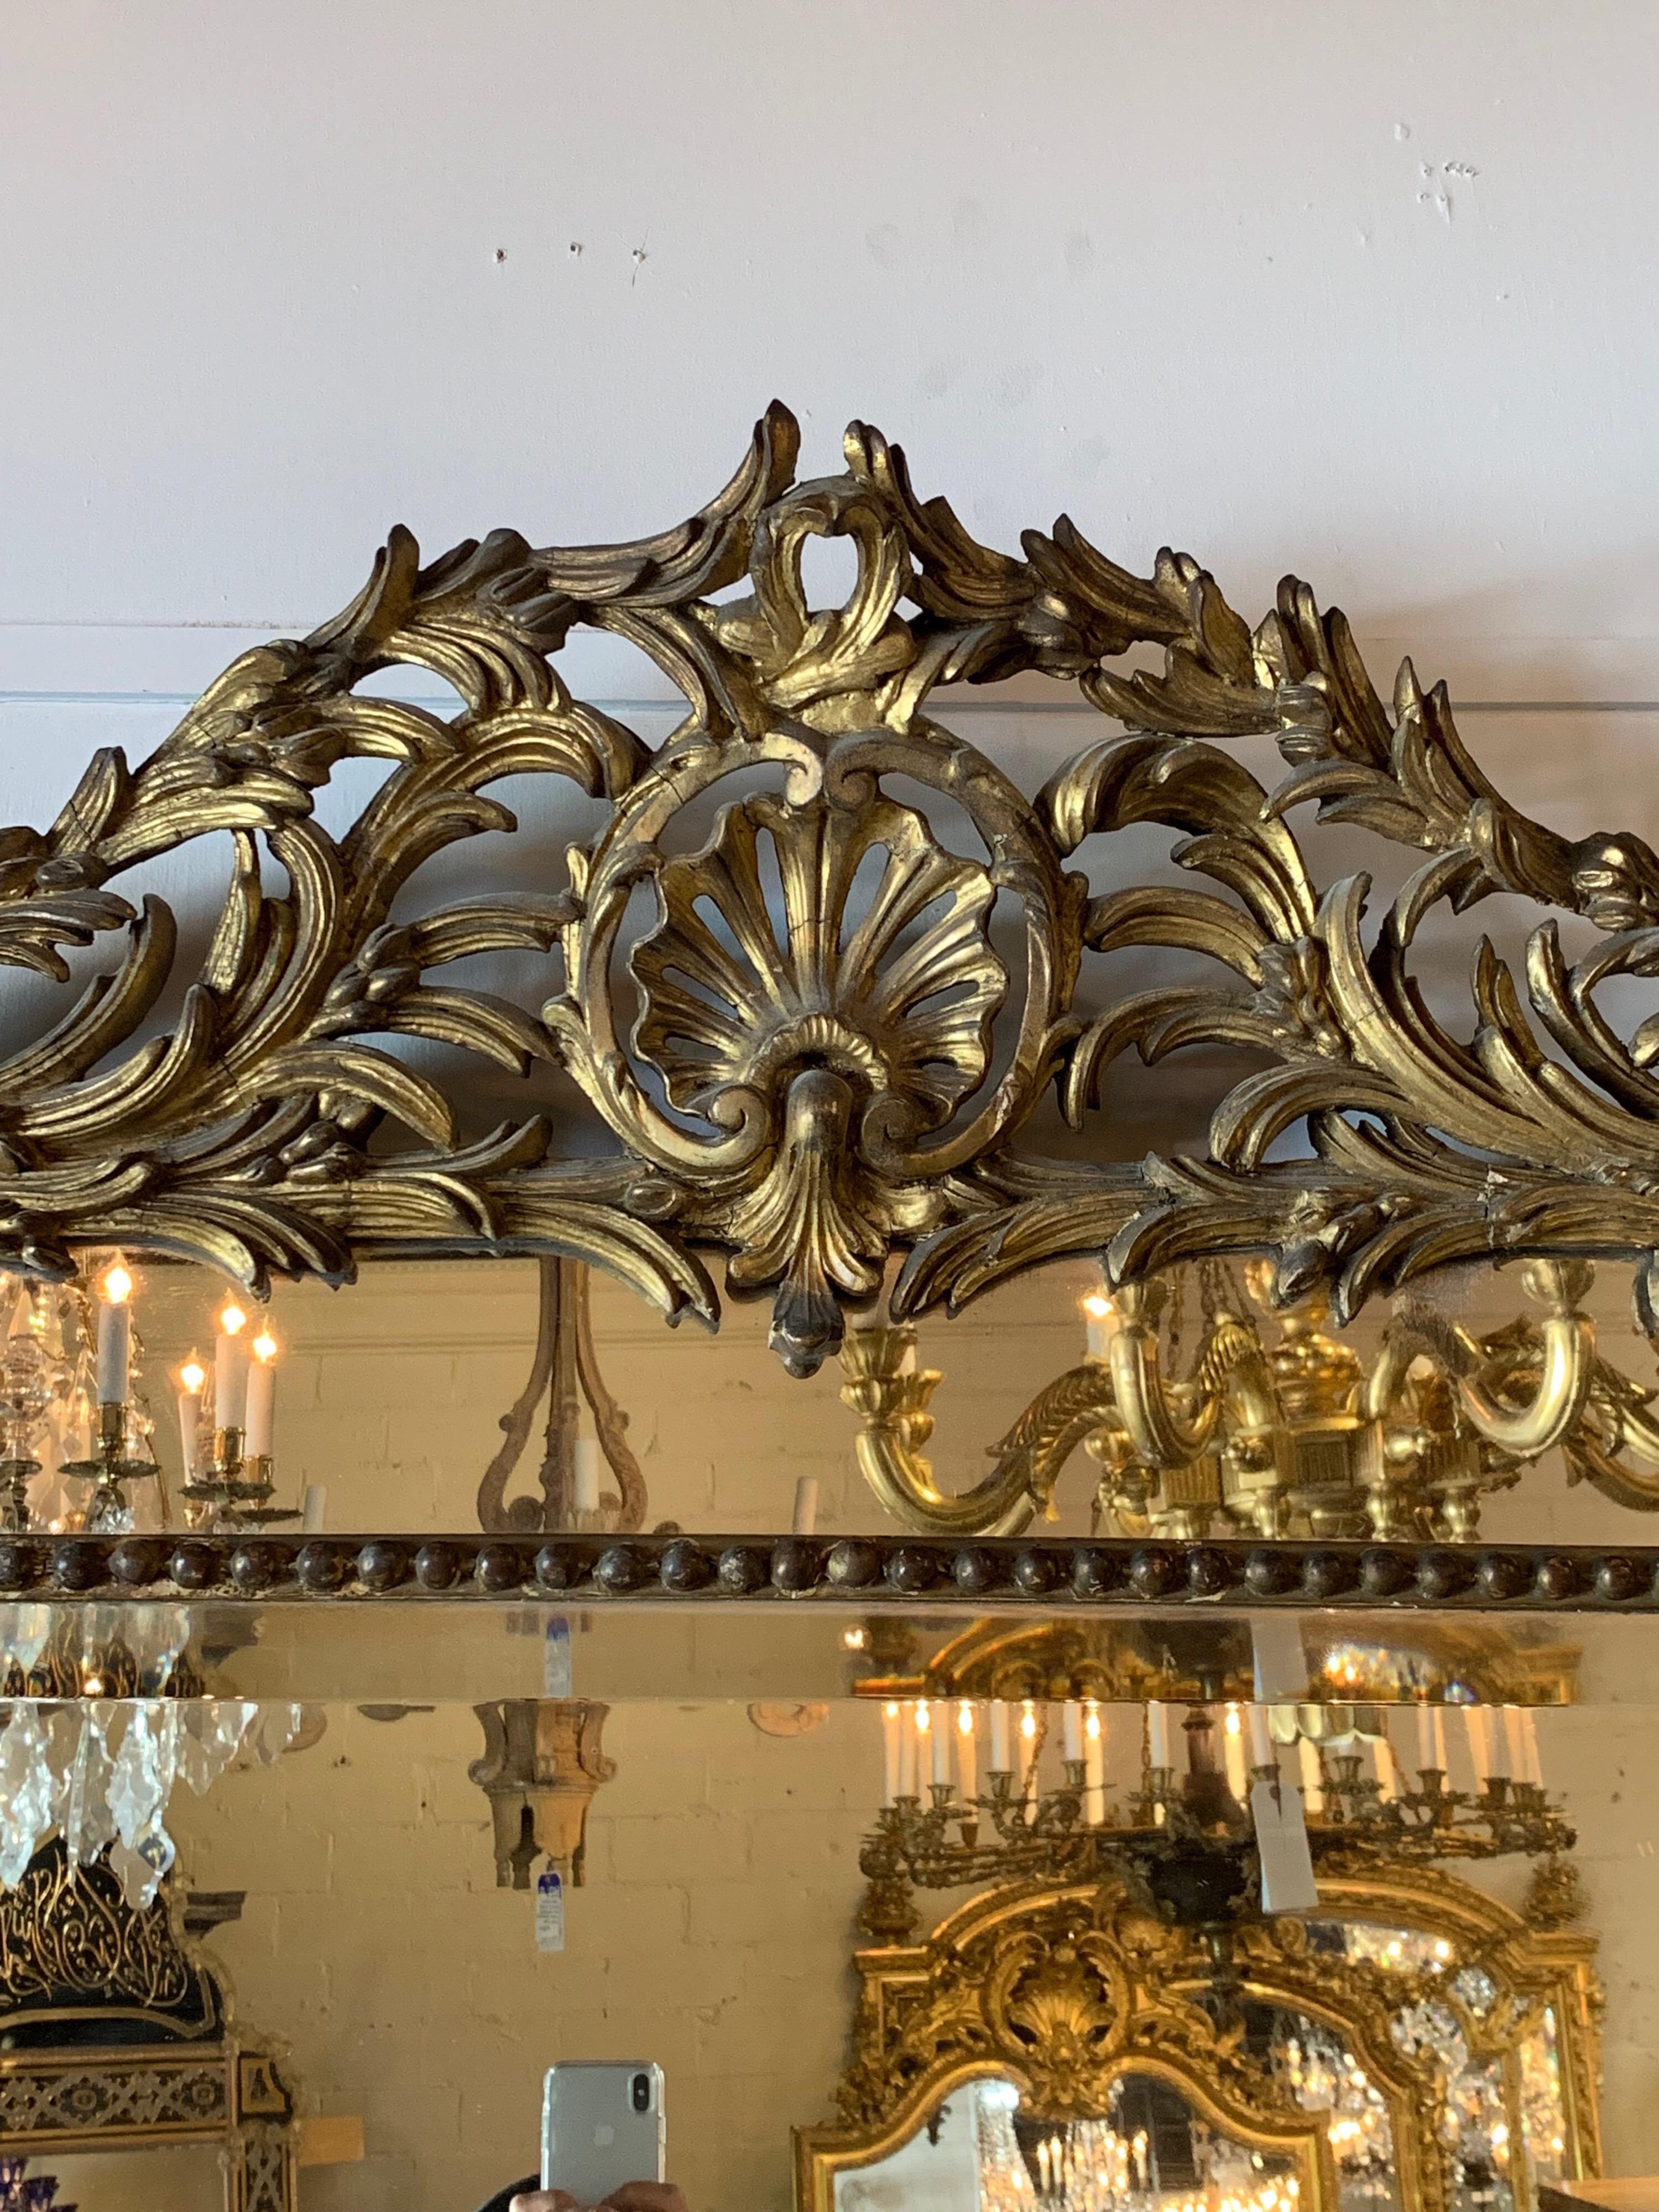 19th century giltwood mirror. Beautiful carvings of shells, leaves and scrolls at the top and sides of the mirror. Impressive item for a fine home.